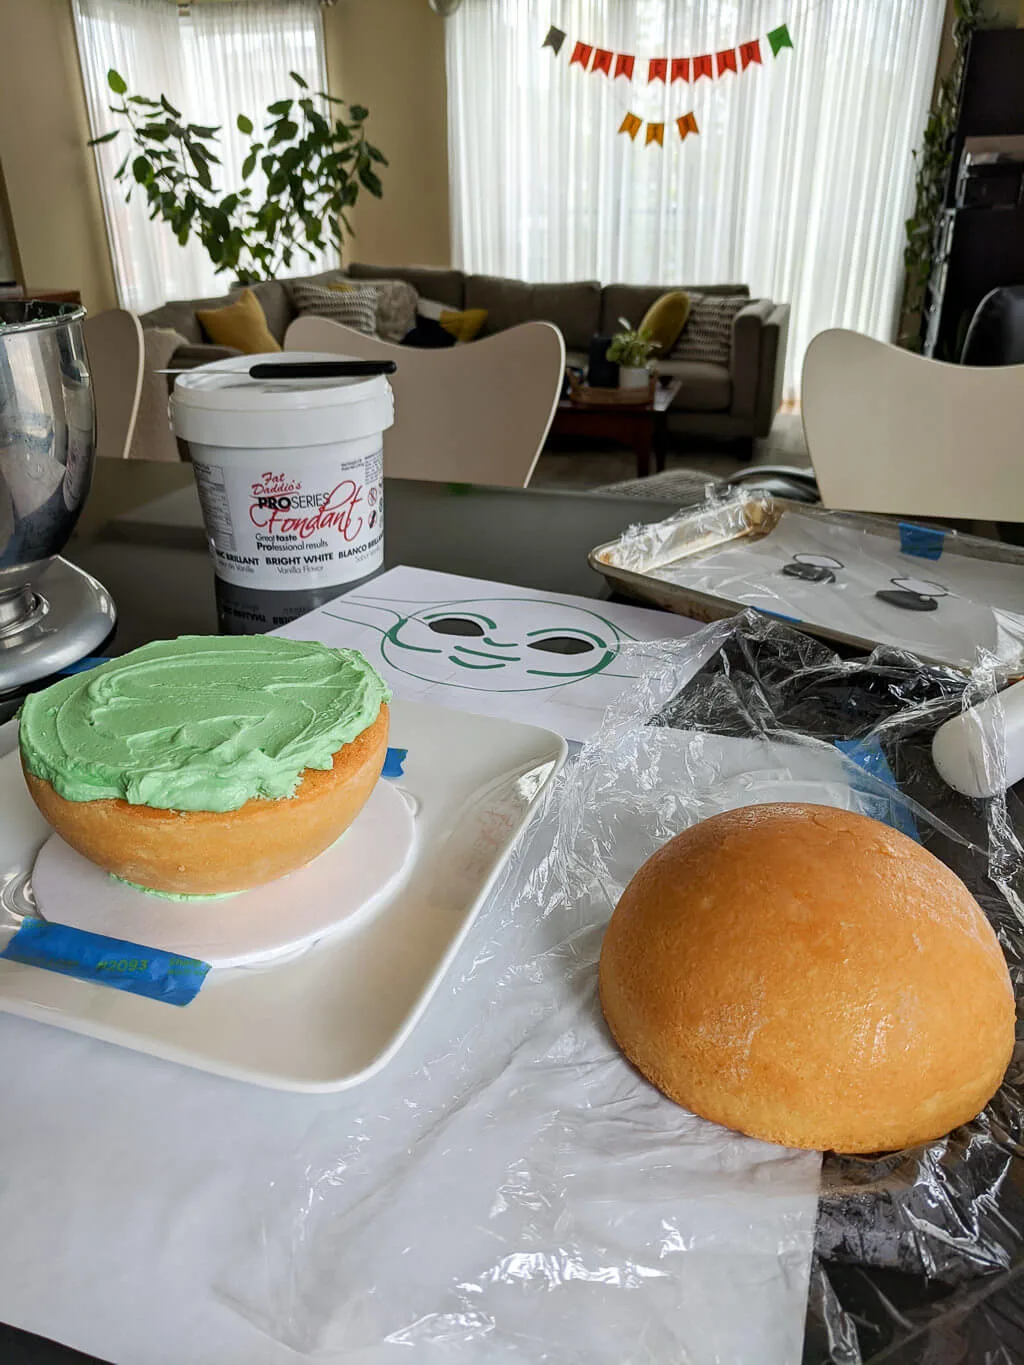 Icing buttercream between cake layers for a round ball sphere cake